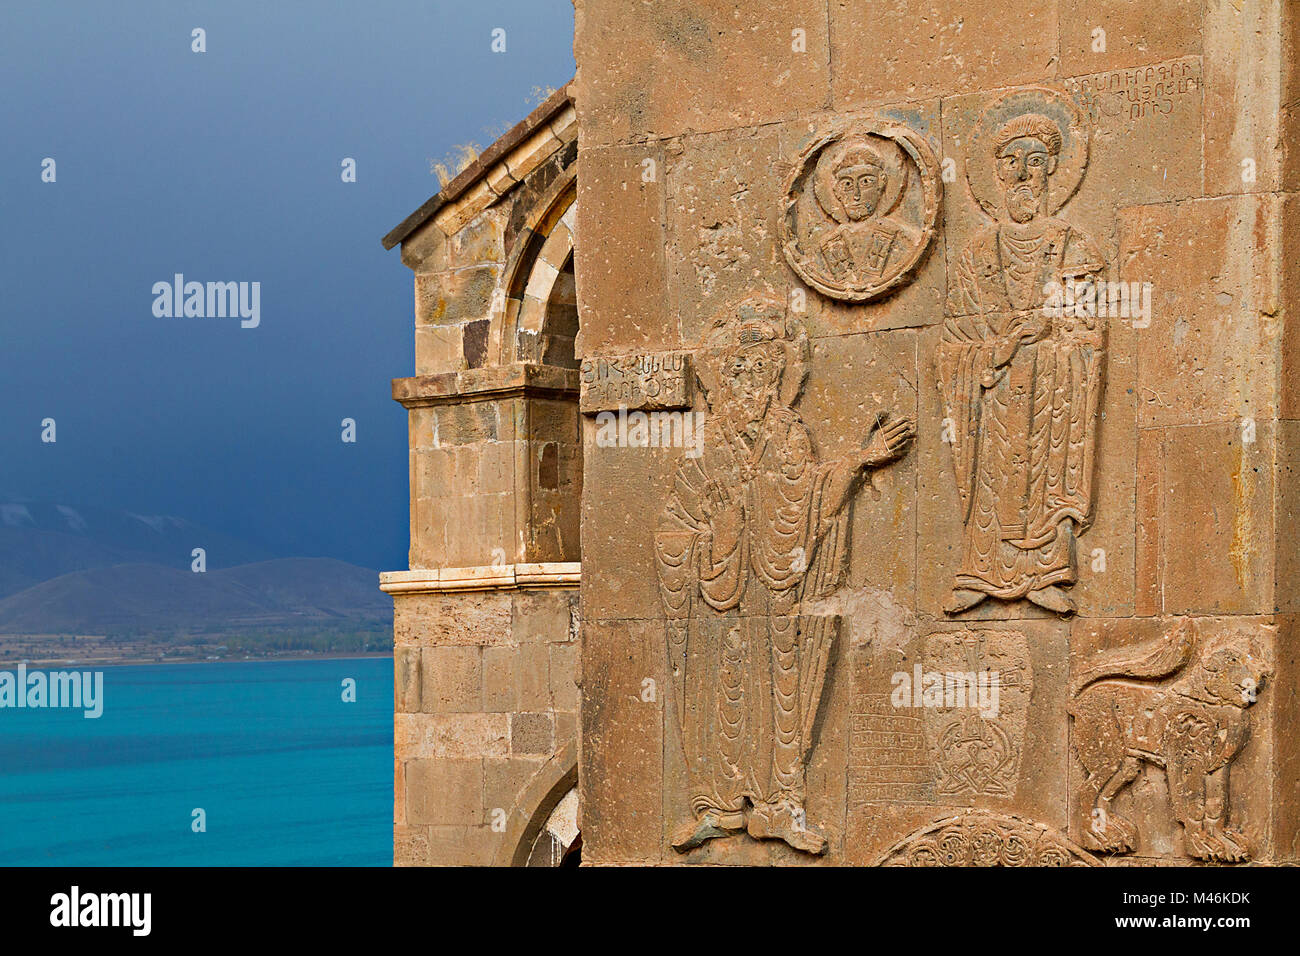 Reliefs on the wall of the ancient Armenian church of Akhtamar on the Akhtamar Island, Lake Van, in the province of Va Stock Photo